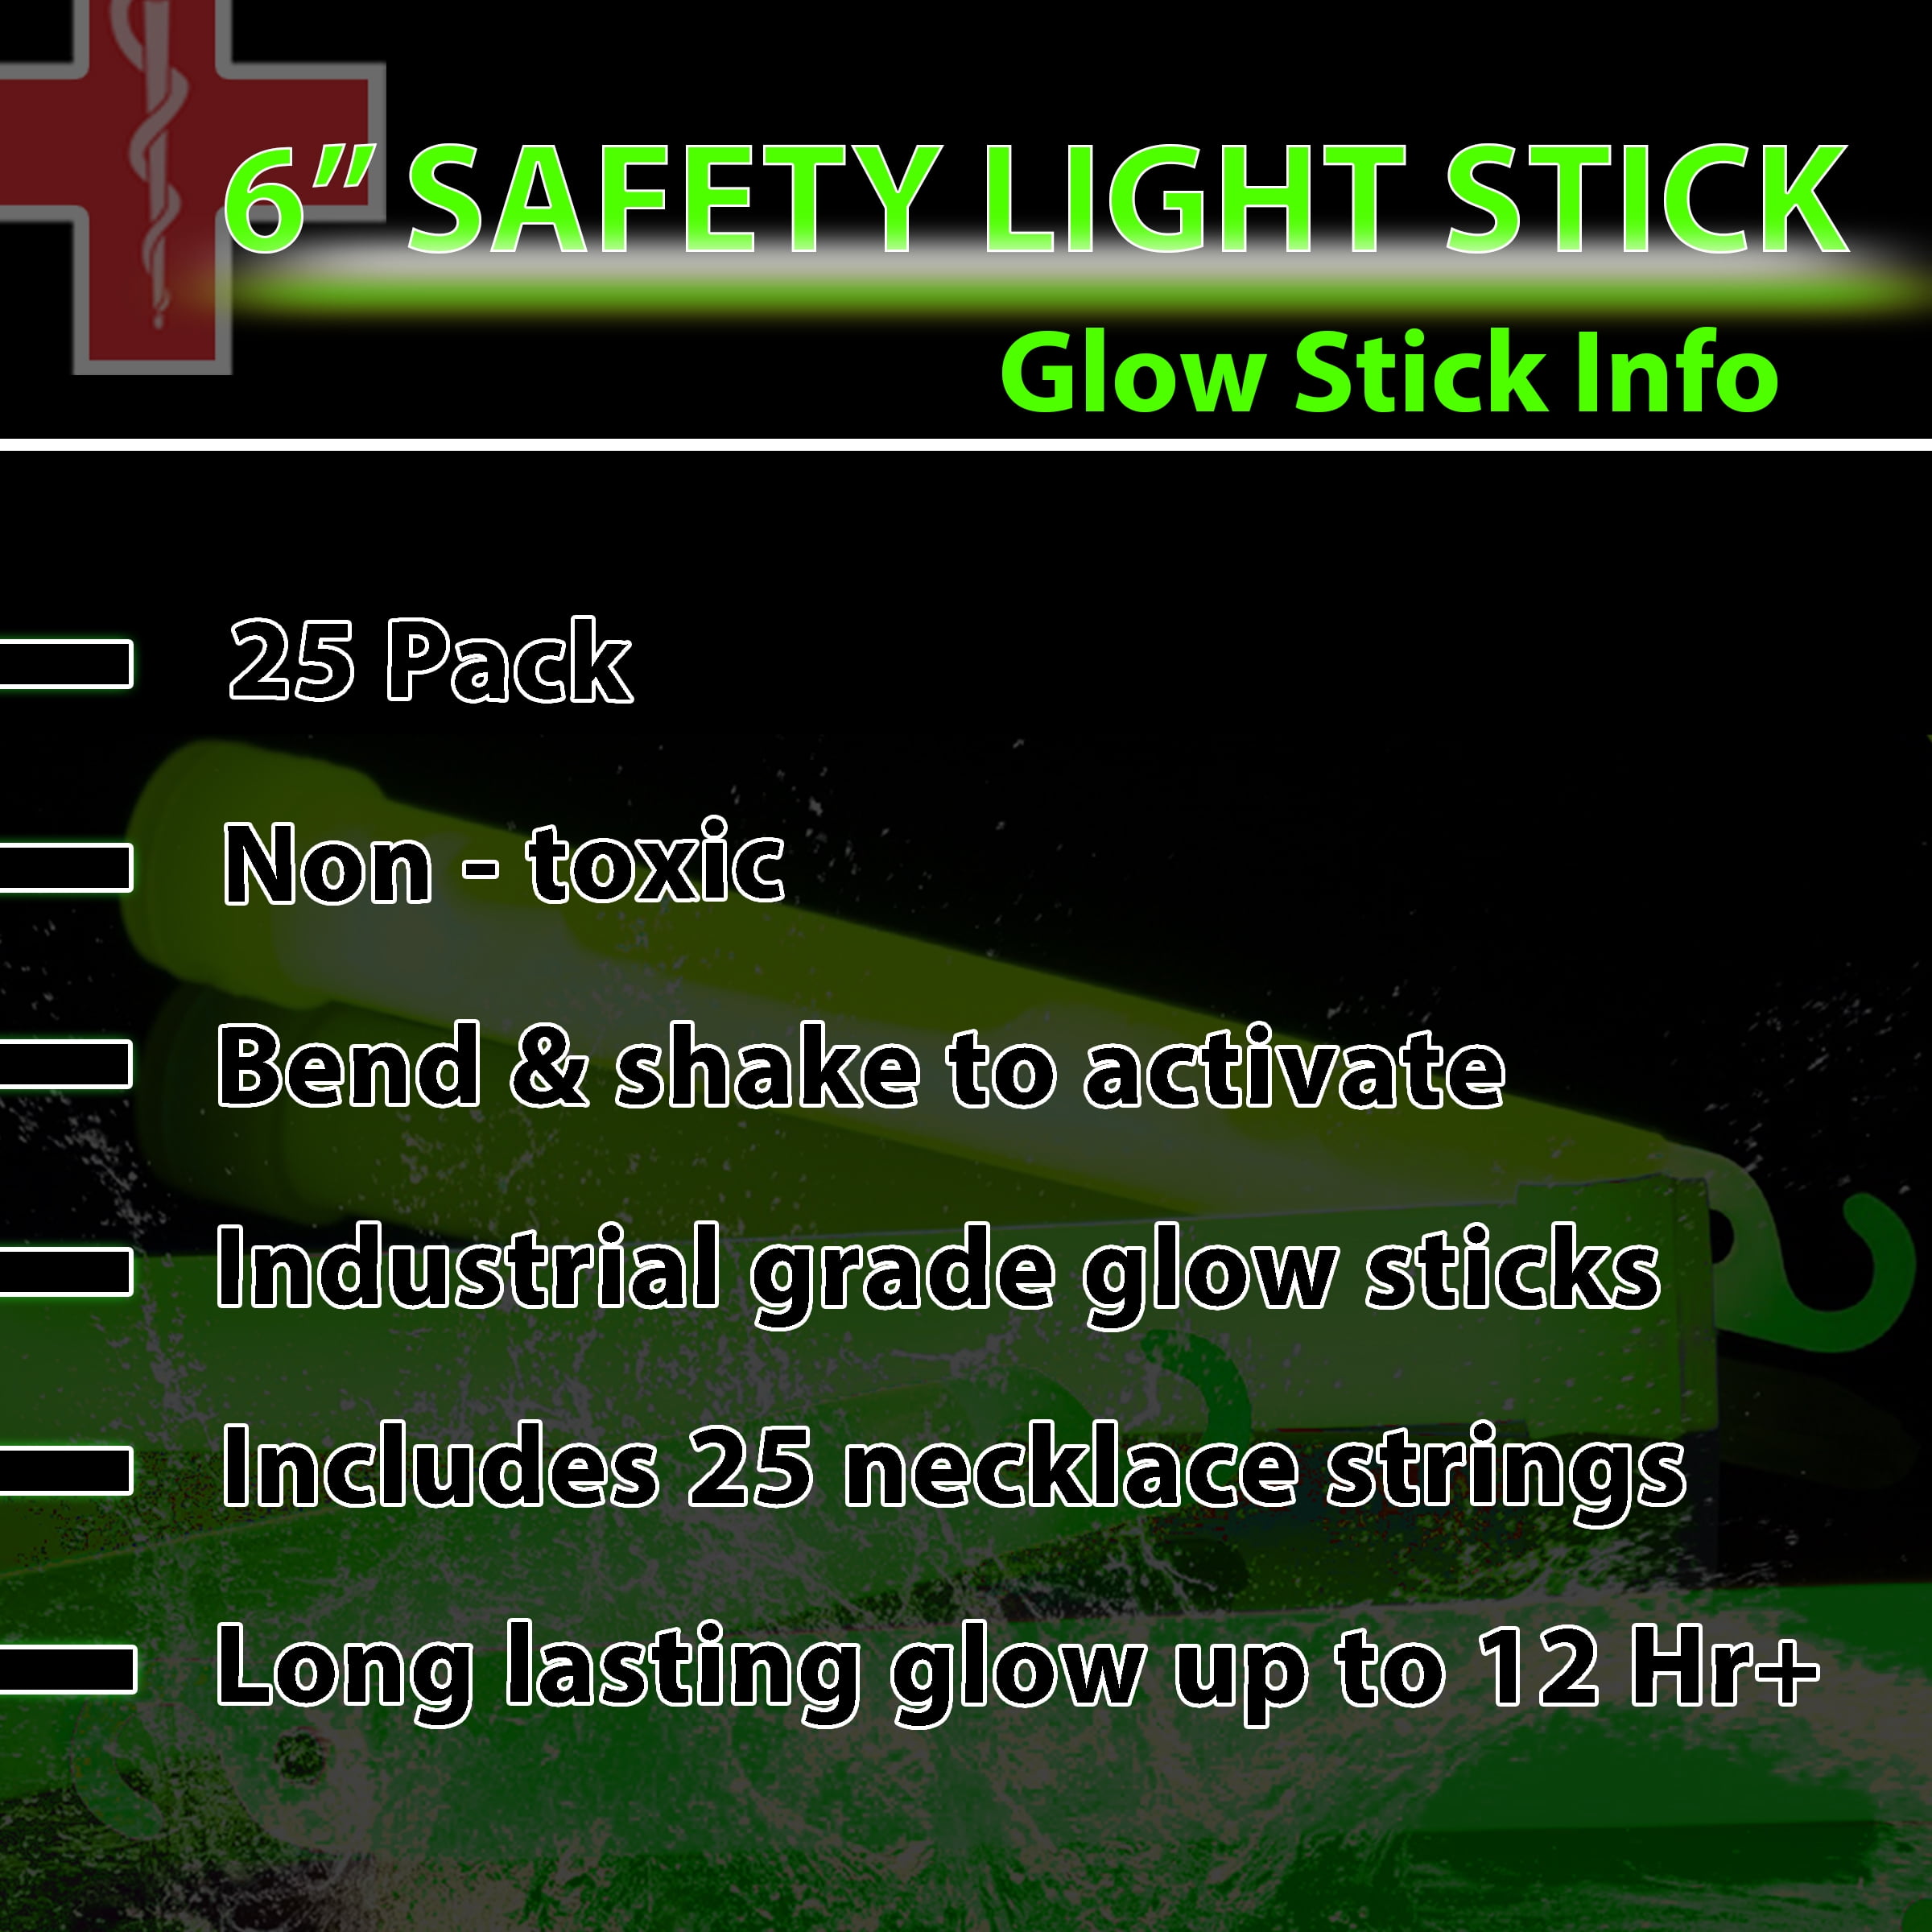 12 Hours Ultra Bright Long Lasting Glow In The Dark Emergency Glow Sticks I  Neon Bulk Chem Light Sticks Military Grade Survival Kit for Blackouts,  Hurricane, Earthquake, Camping, Fishing & Parties Multi-Colored